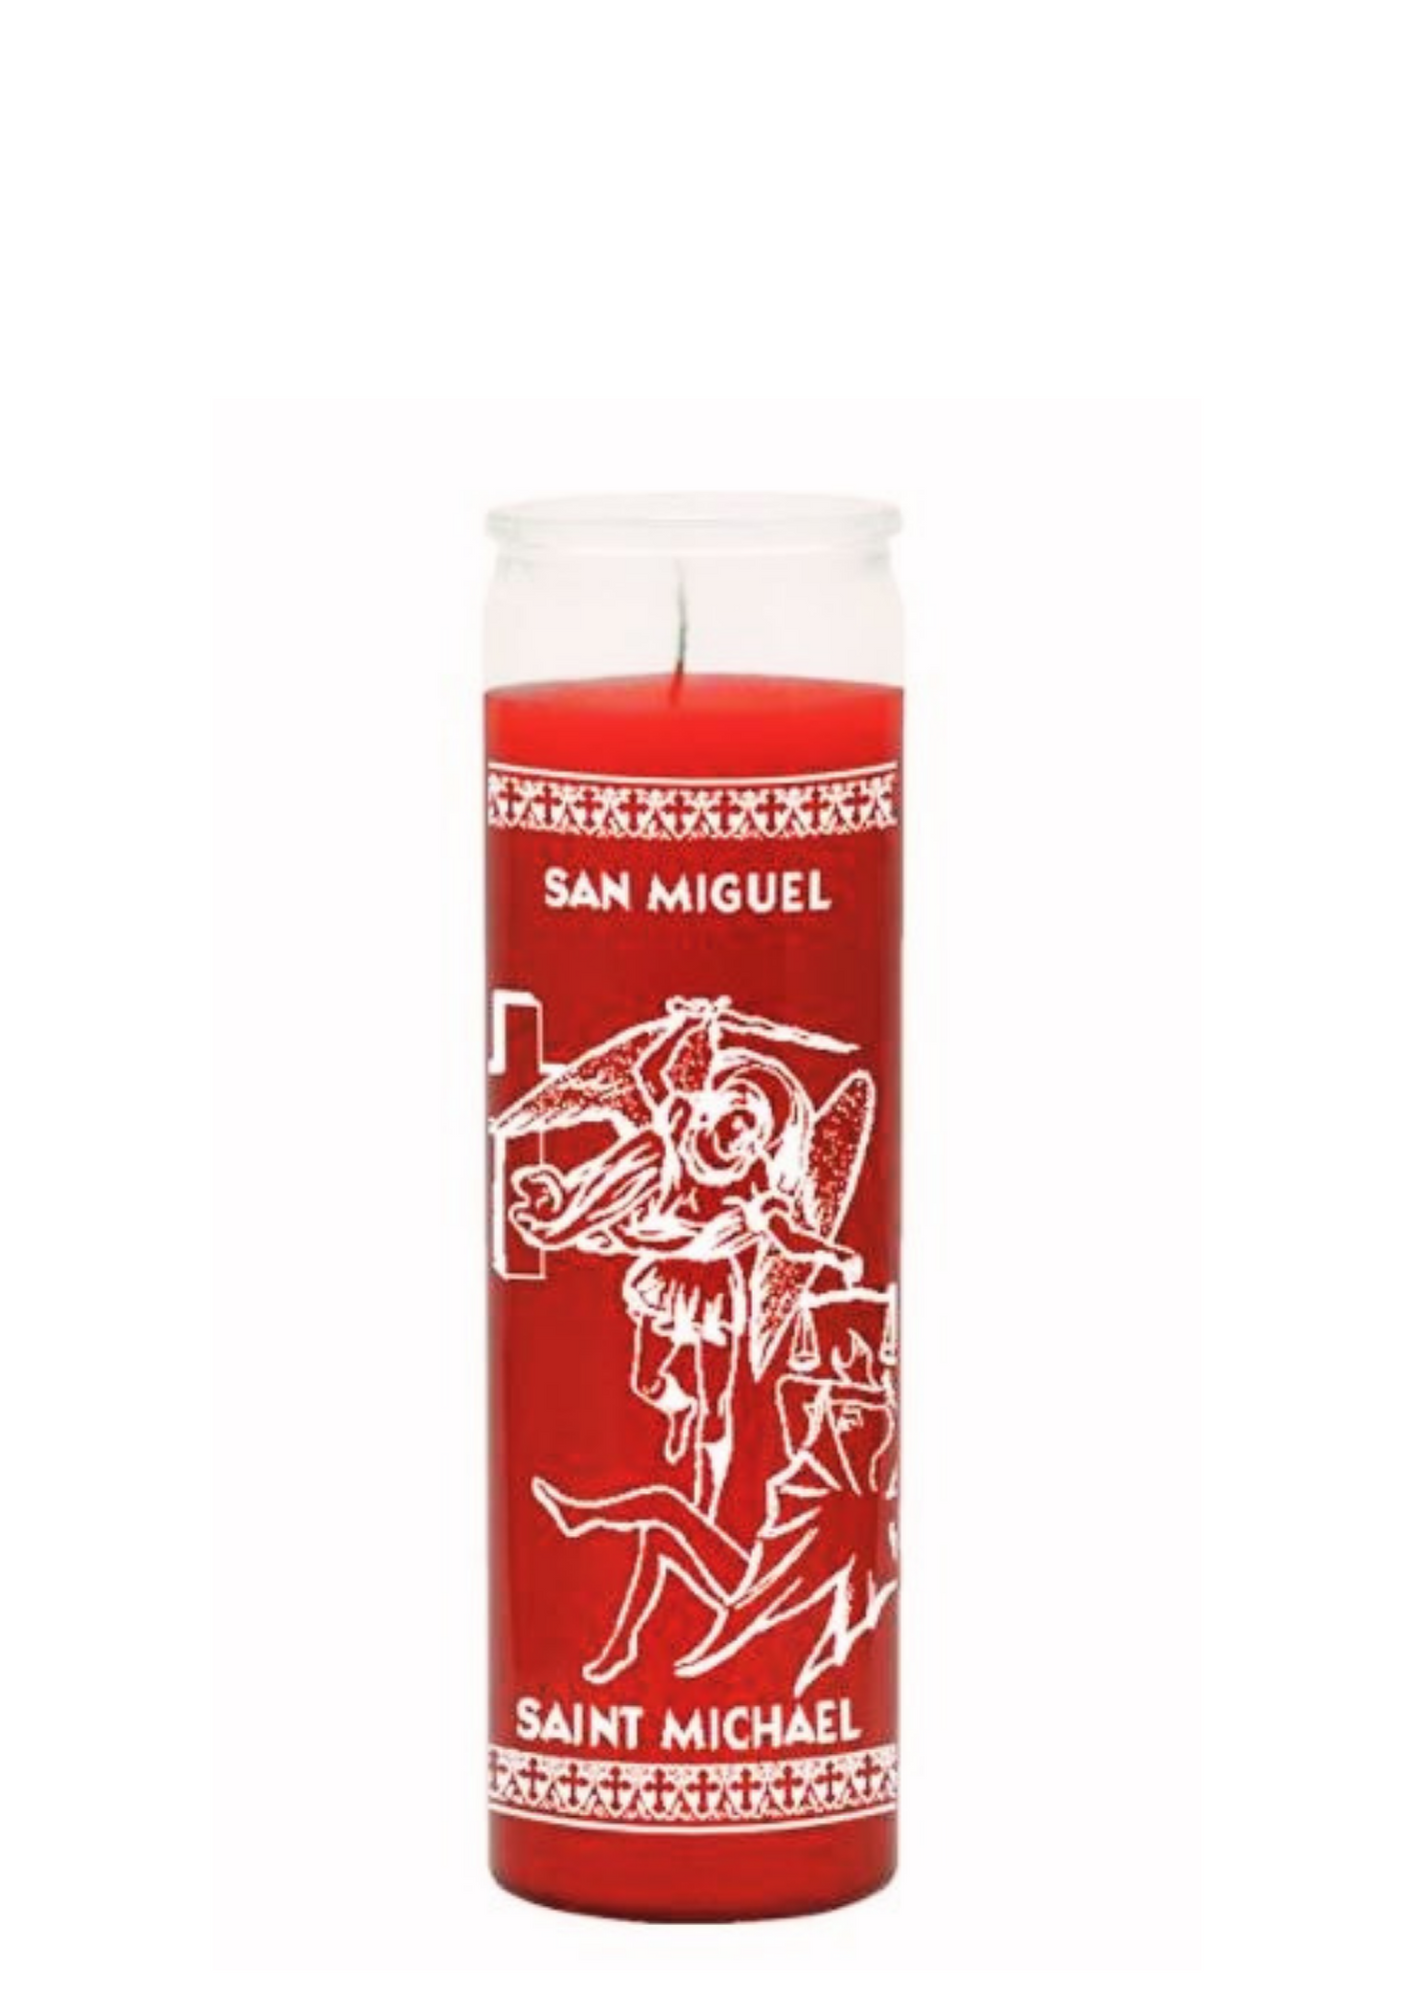 Saint Michael ( Red) 1 Color 7 Day Candle